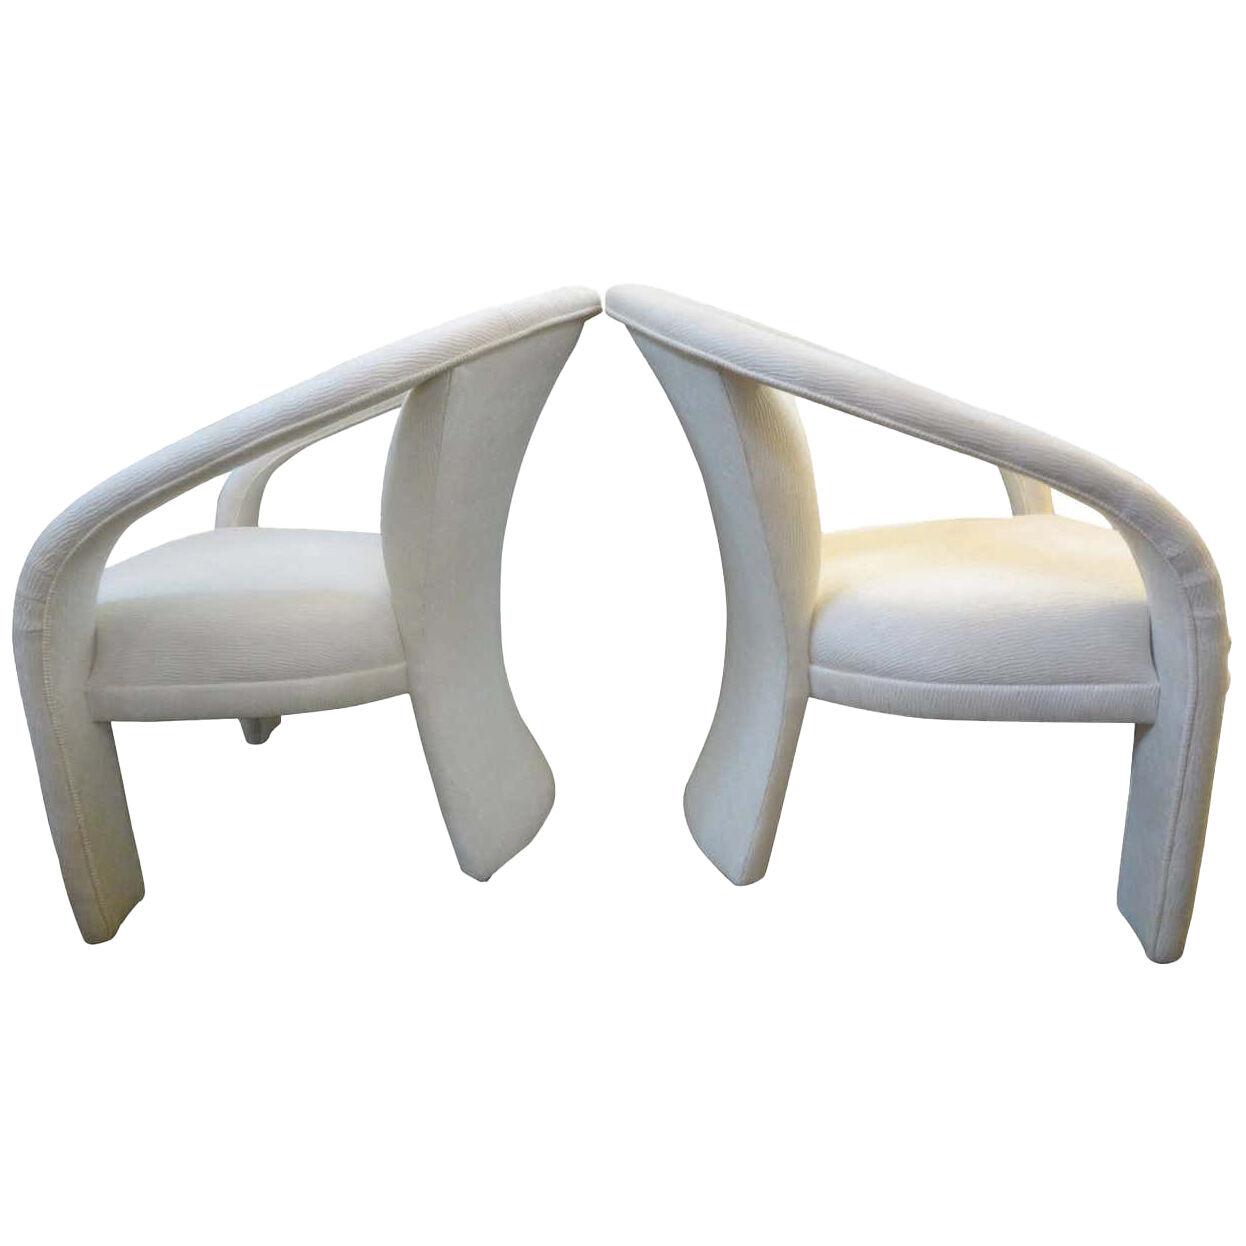 Pair of Post Modern Chairs by Marge Carson